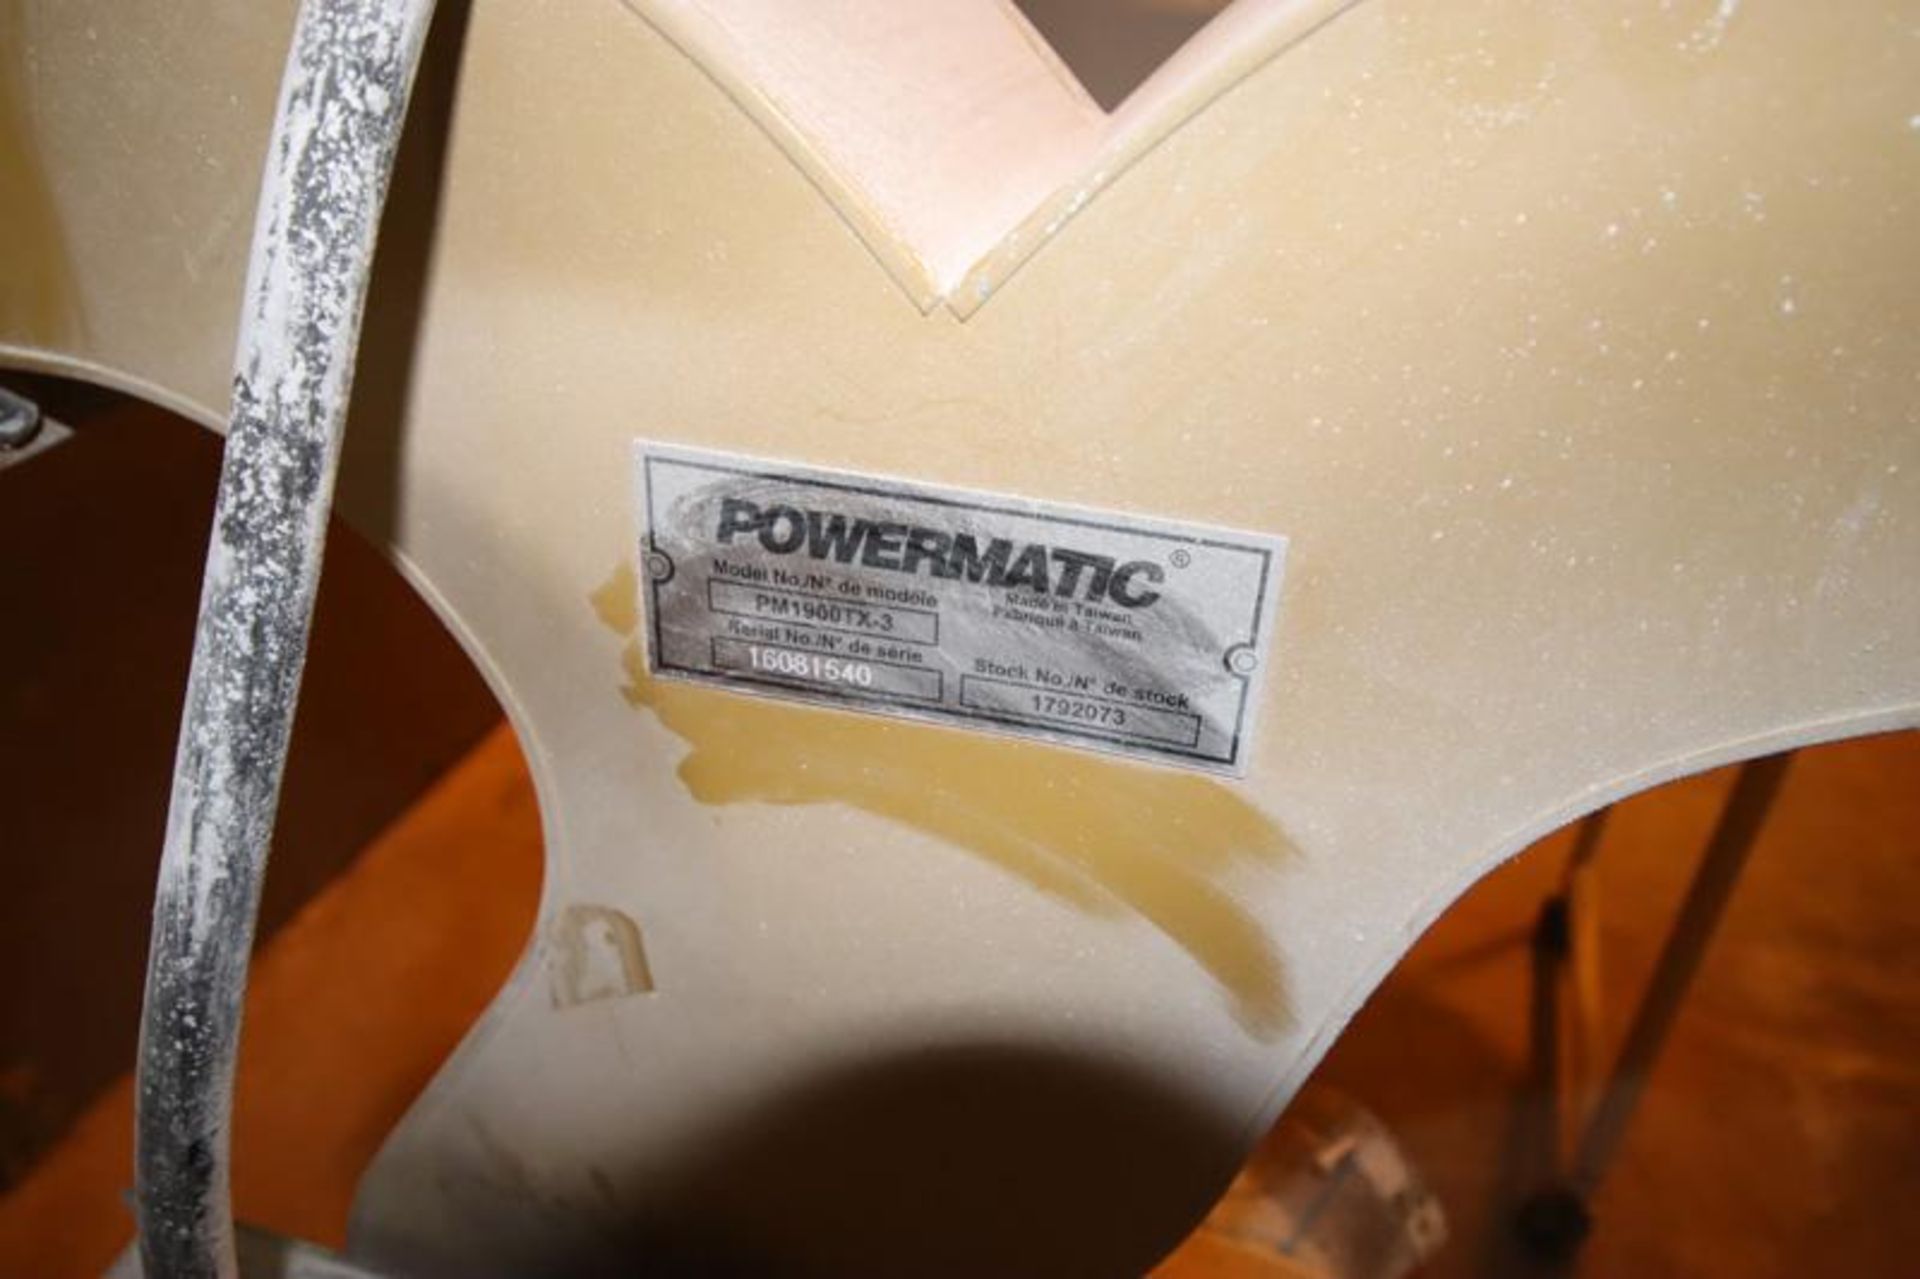 Powermatic Turbocone Roll Around Double Bag Dust Collector, Model PM1900TX-3, 220 Volt - Image 2 of 2